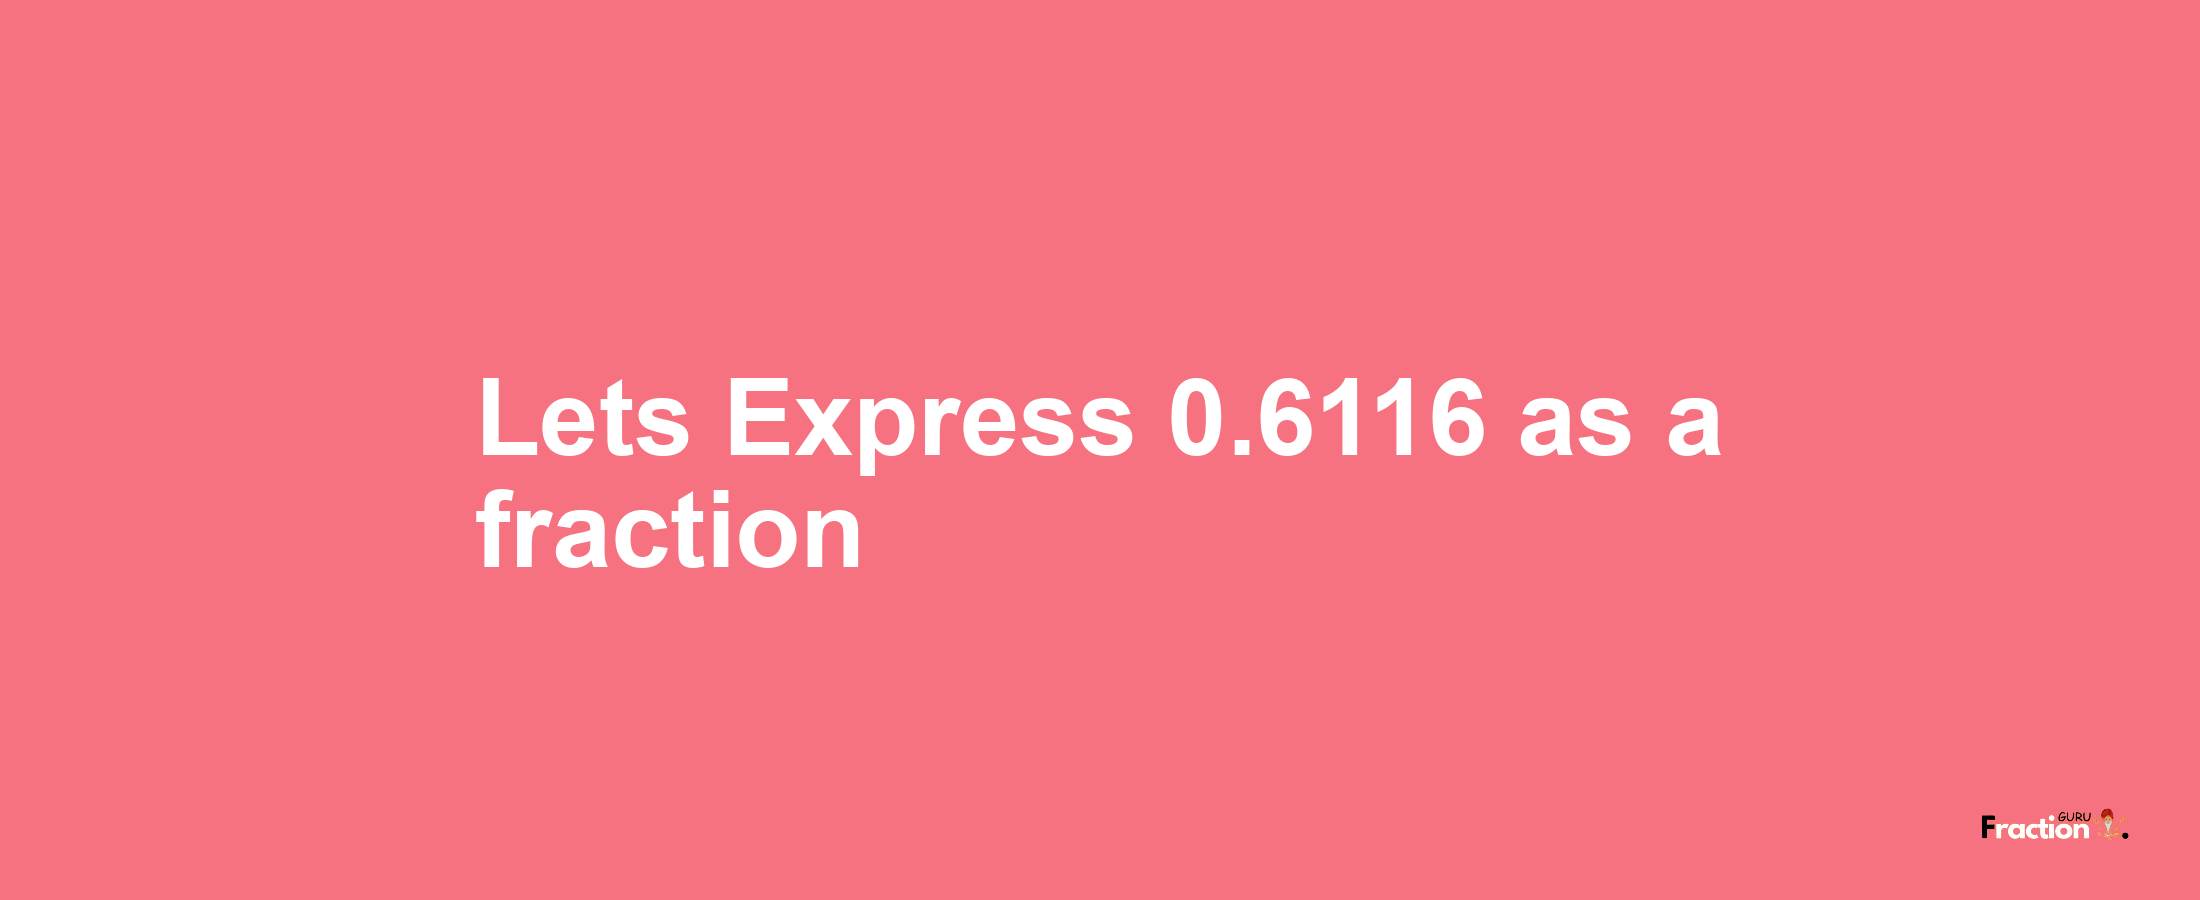 Lets Express 0.6116 as afraction